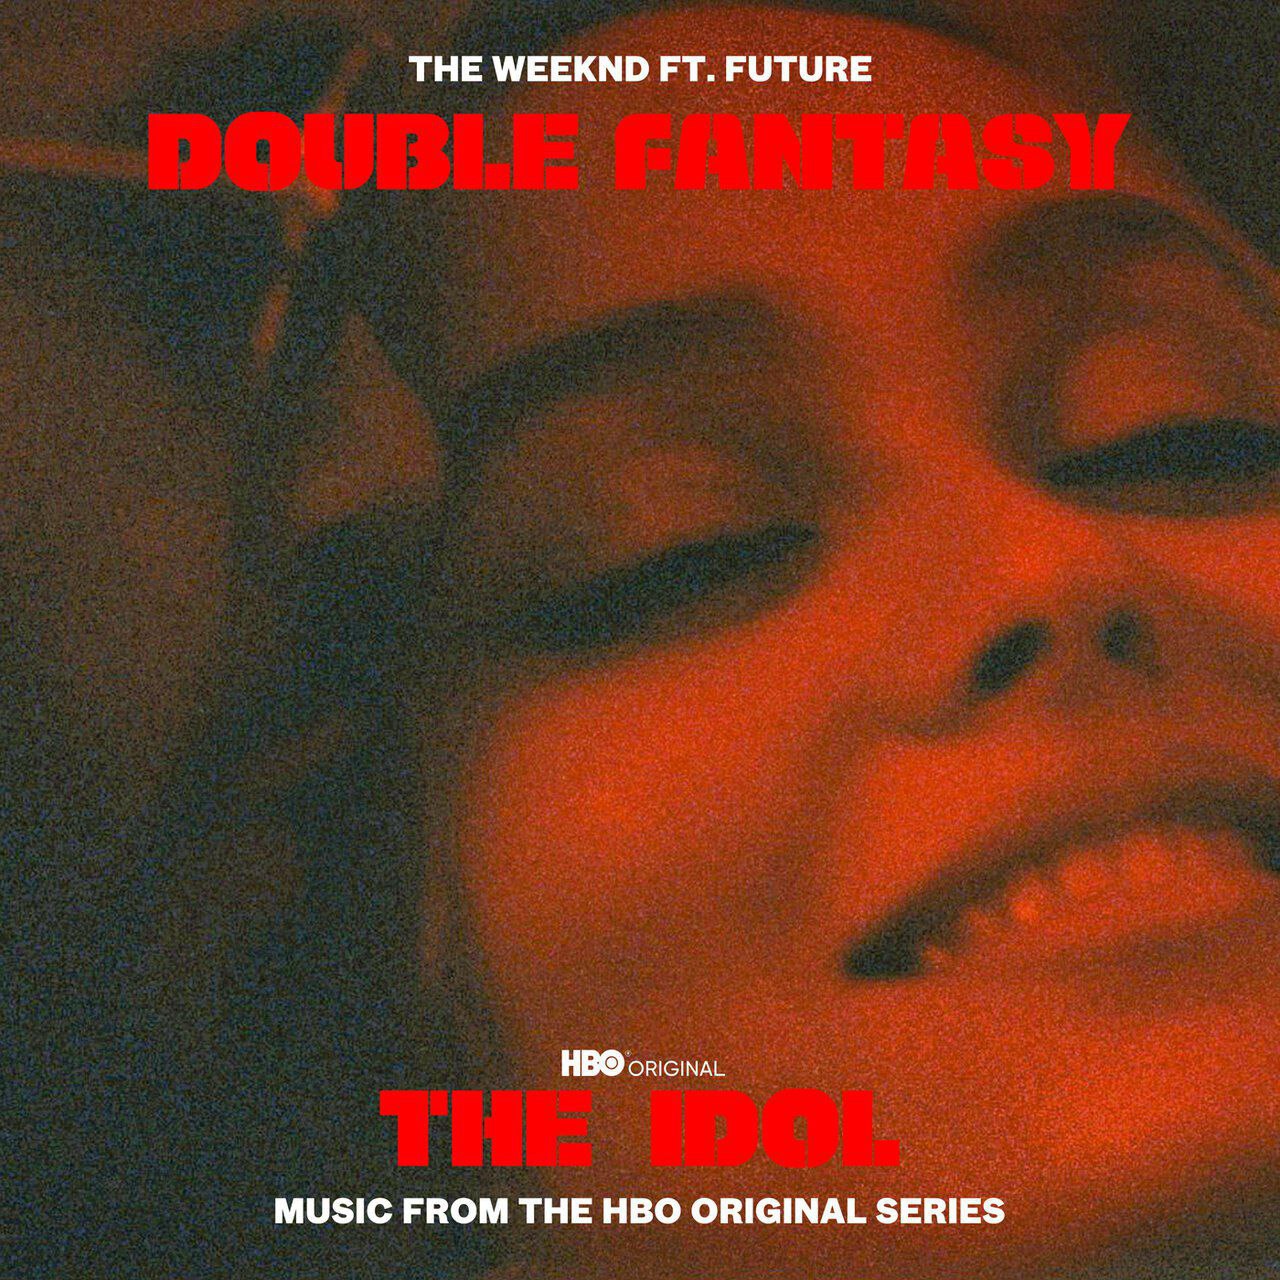 The Weeknd Ft. Future - Double Fantasy